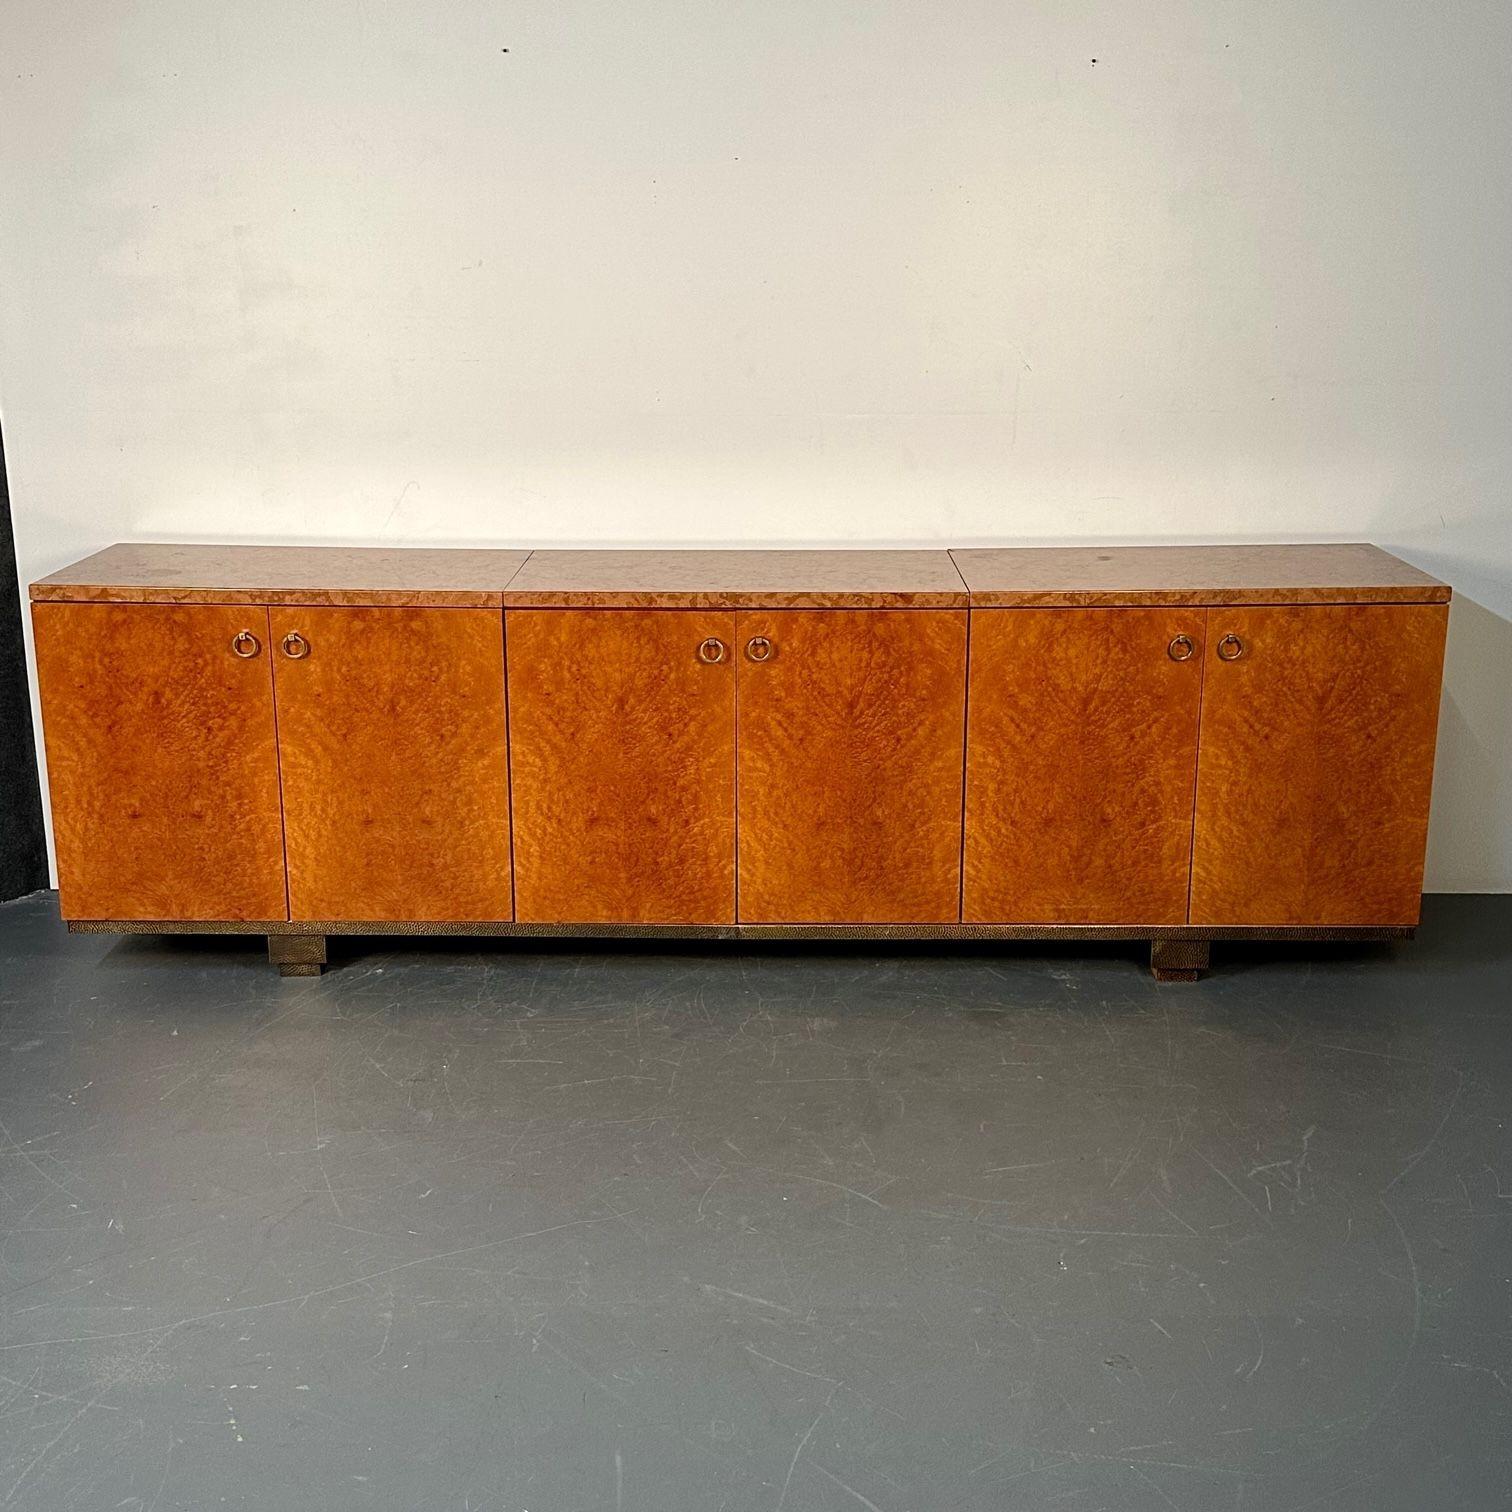 Peter Marino Modern Sideboard or Cabinet in Maple, Marble and Brass, Monumental
 
Shown here is a simply stunning one of a kind cabinet by award winning celebrity designer Peter Marino custom made for a NYC client. This monumental sideboard designed